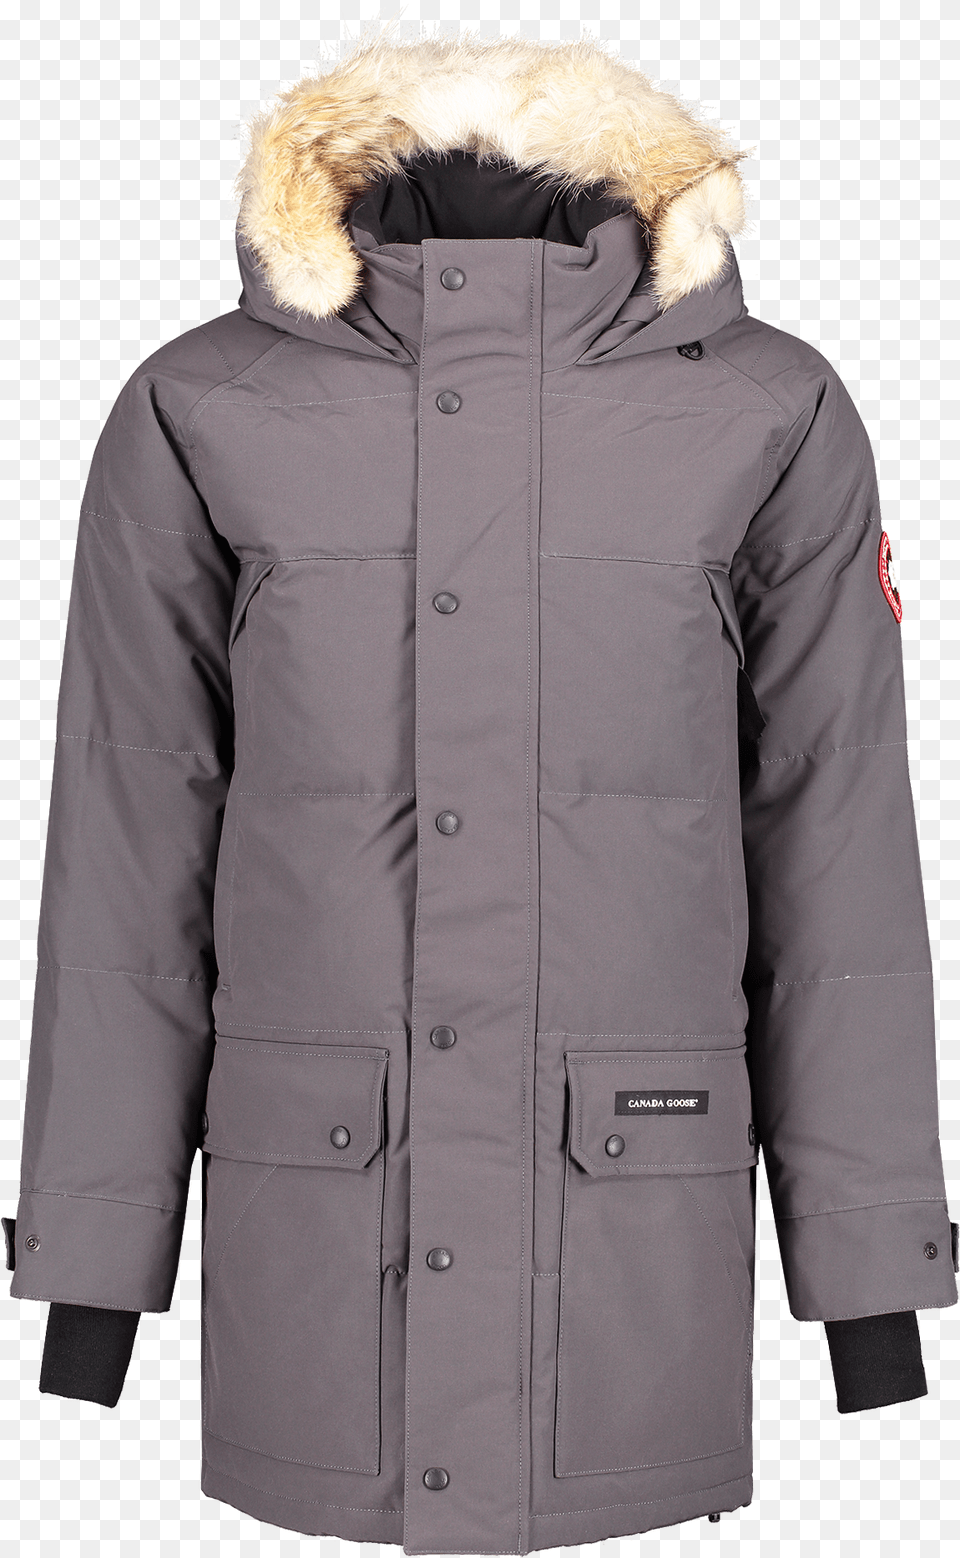 Front View Image Of Canada Goose Men S Emory Parka Canada Goose, Clothing, Coat, Jacket Free Transparent Png